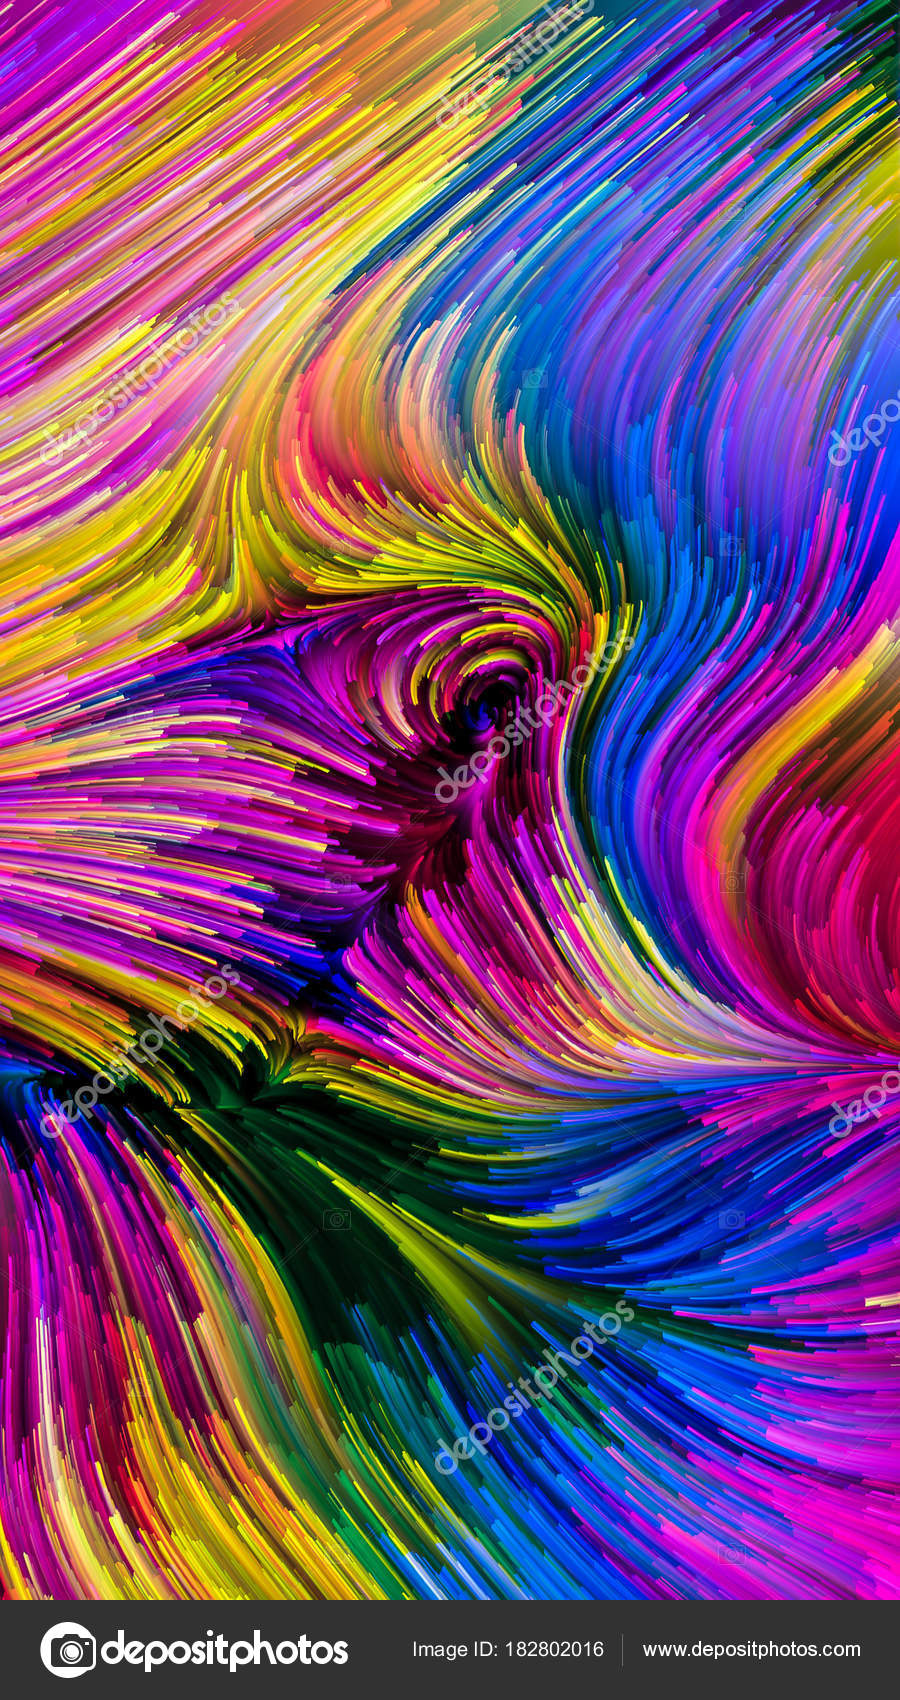 Artistic Abstraction Composed Of Flowing Paint Pattern - Visual Arts , HD Wallpaper & Backgrounds